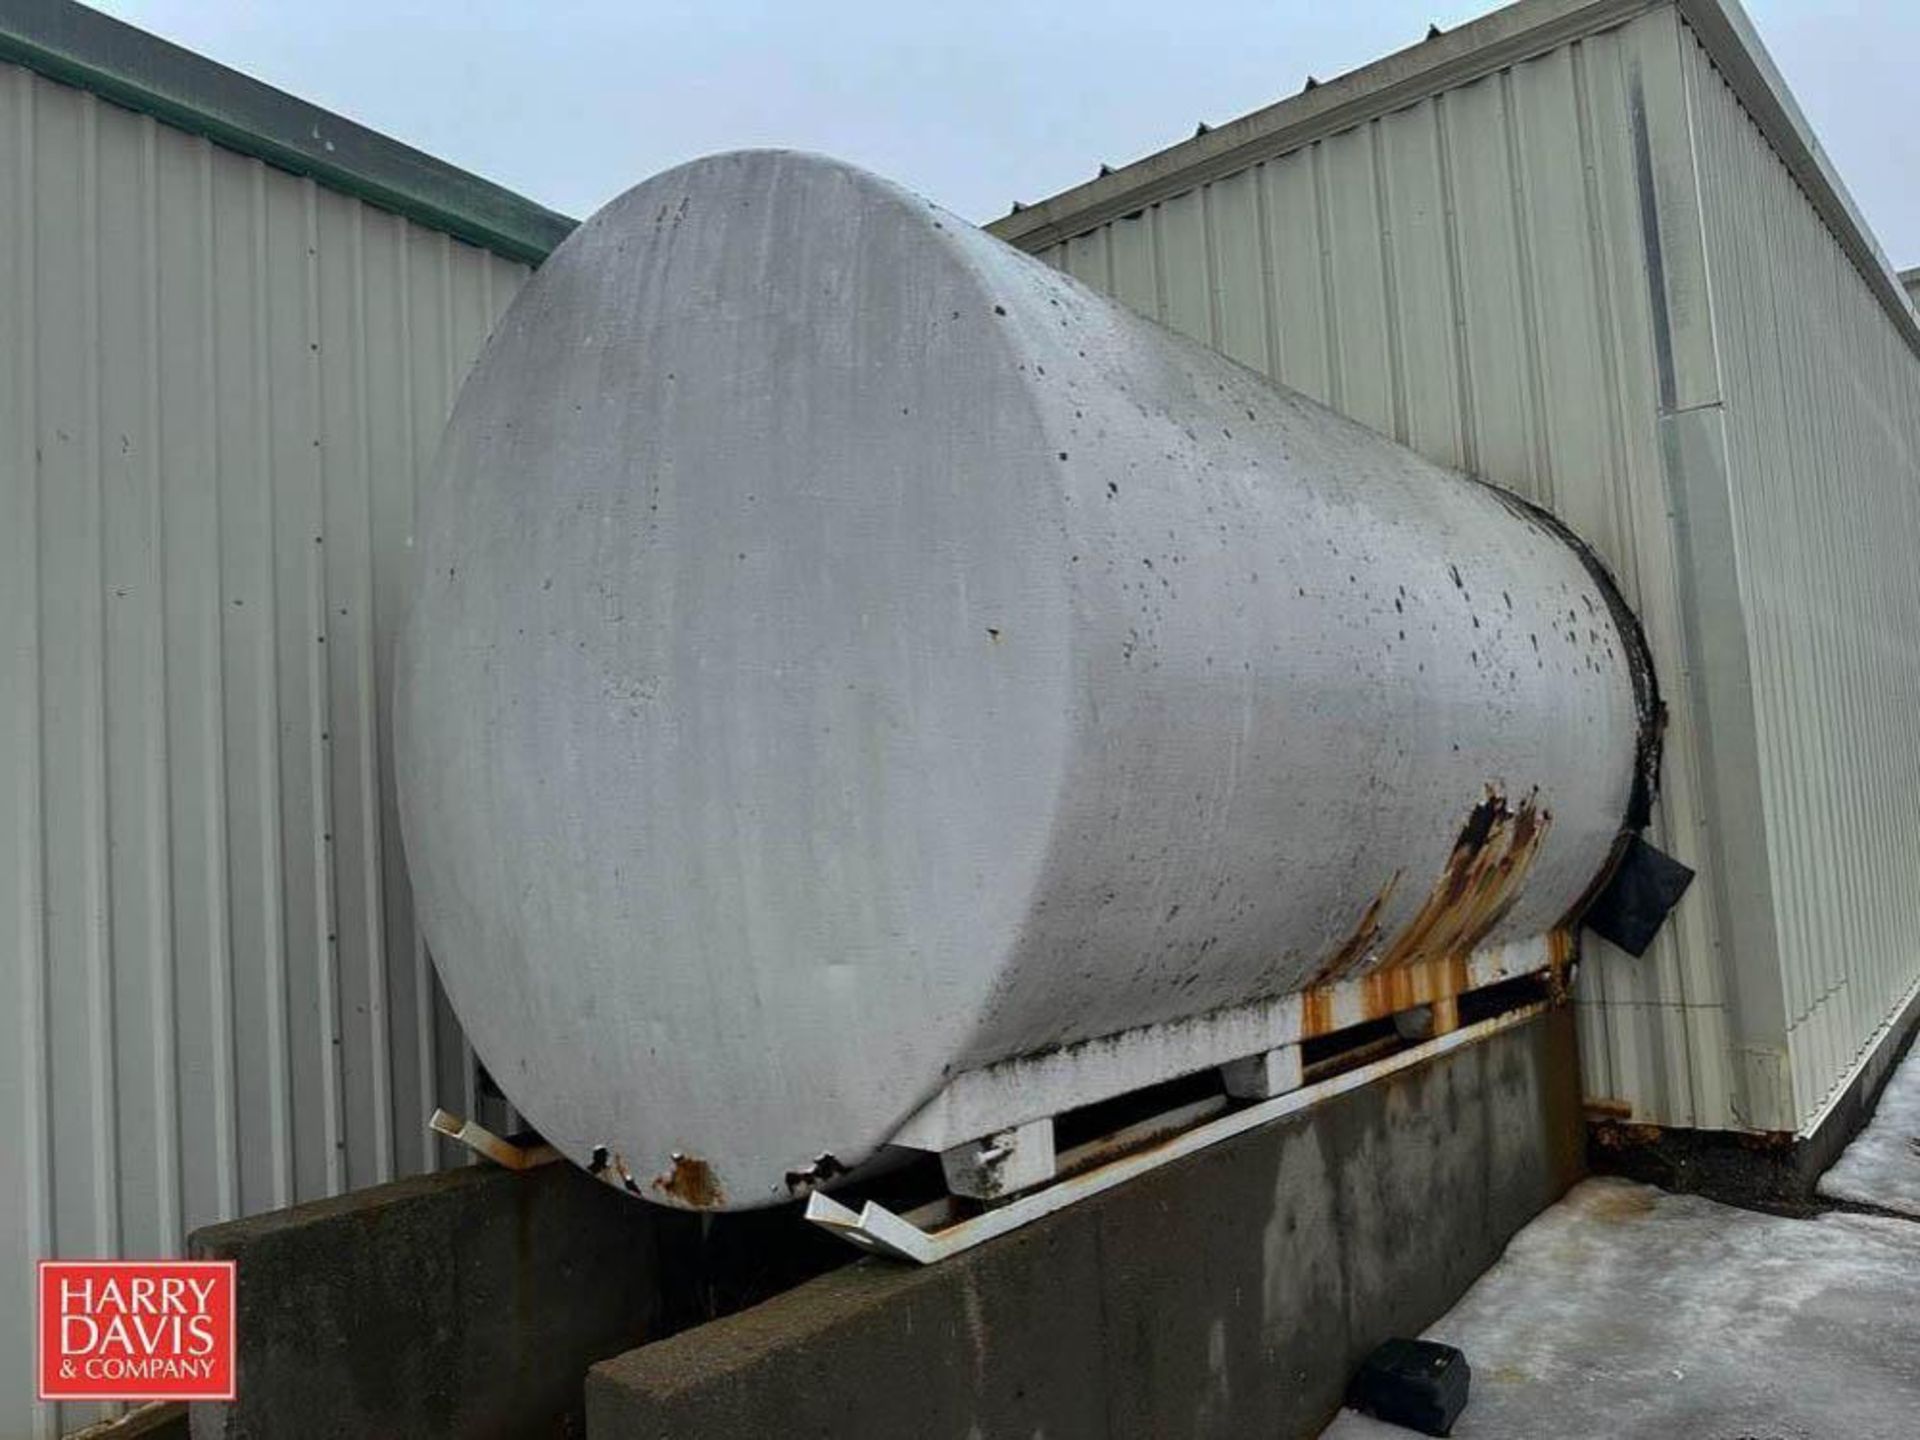 4,000 Gallon Horizontal S/S Tank with (2) Butterfly Valves - Rigging Fee: $4,000 - Bild 2 aus 2